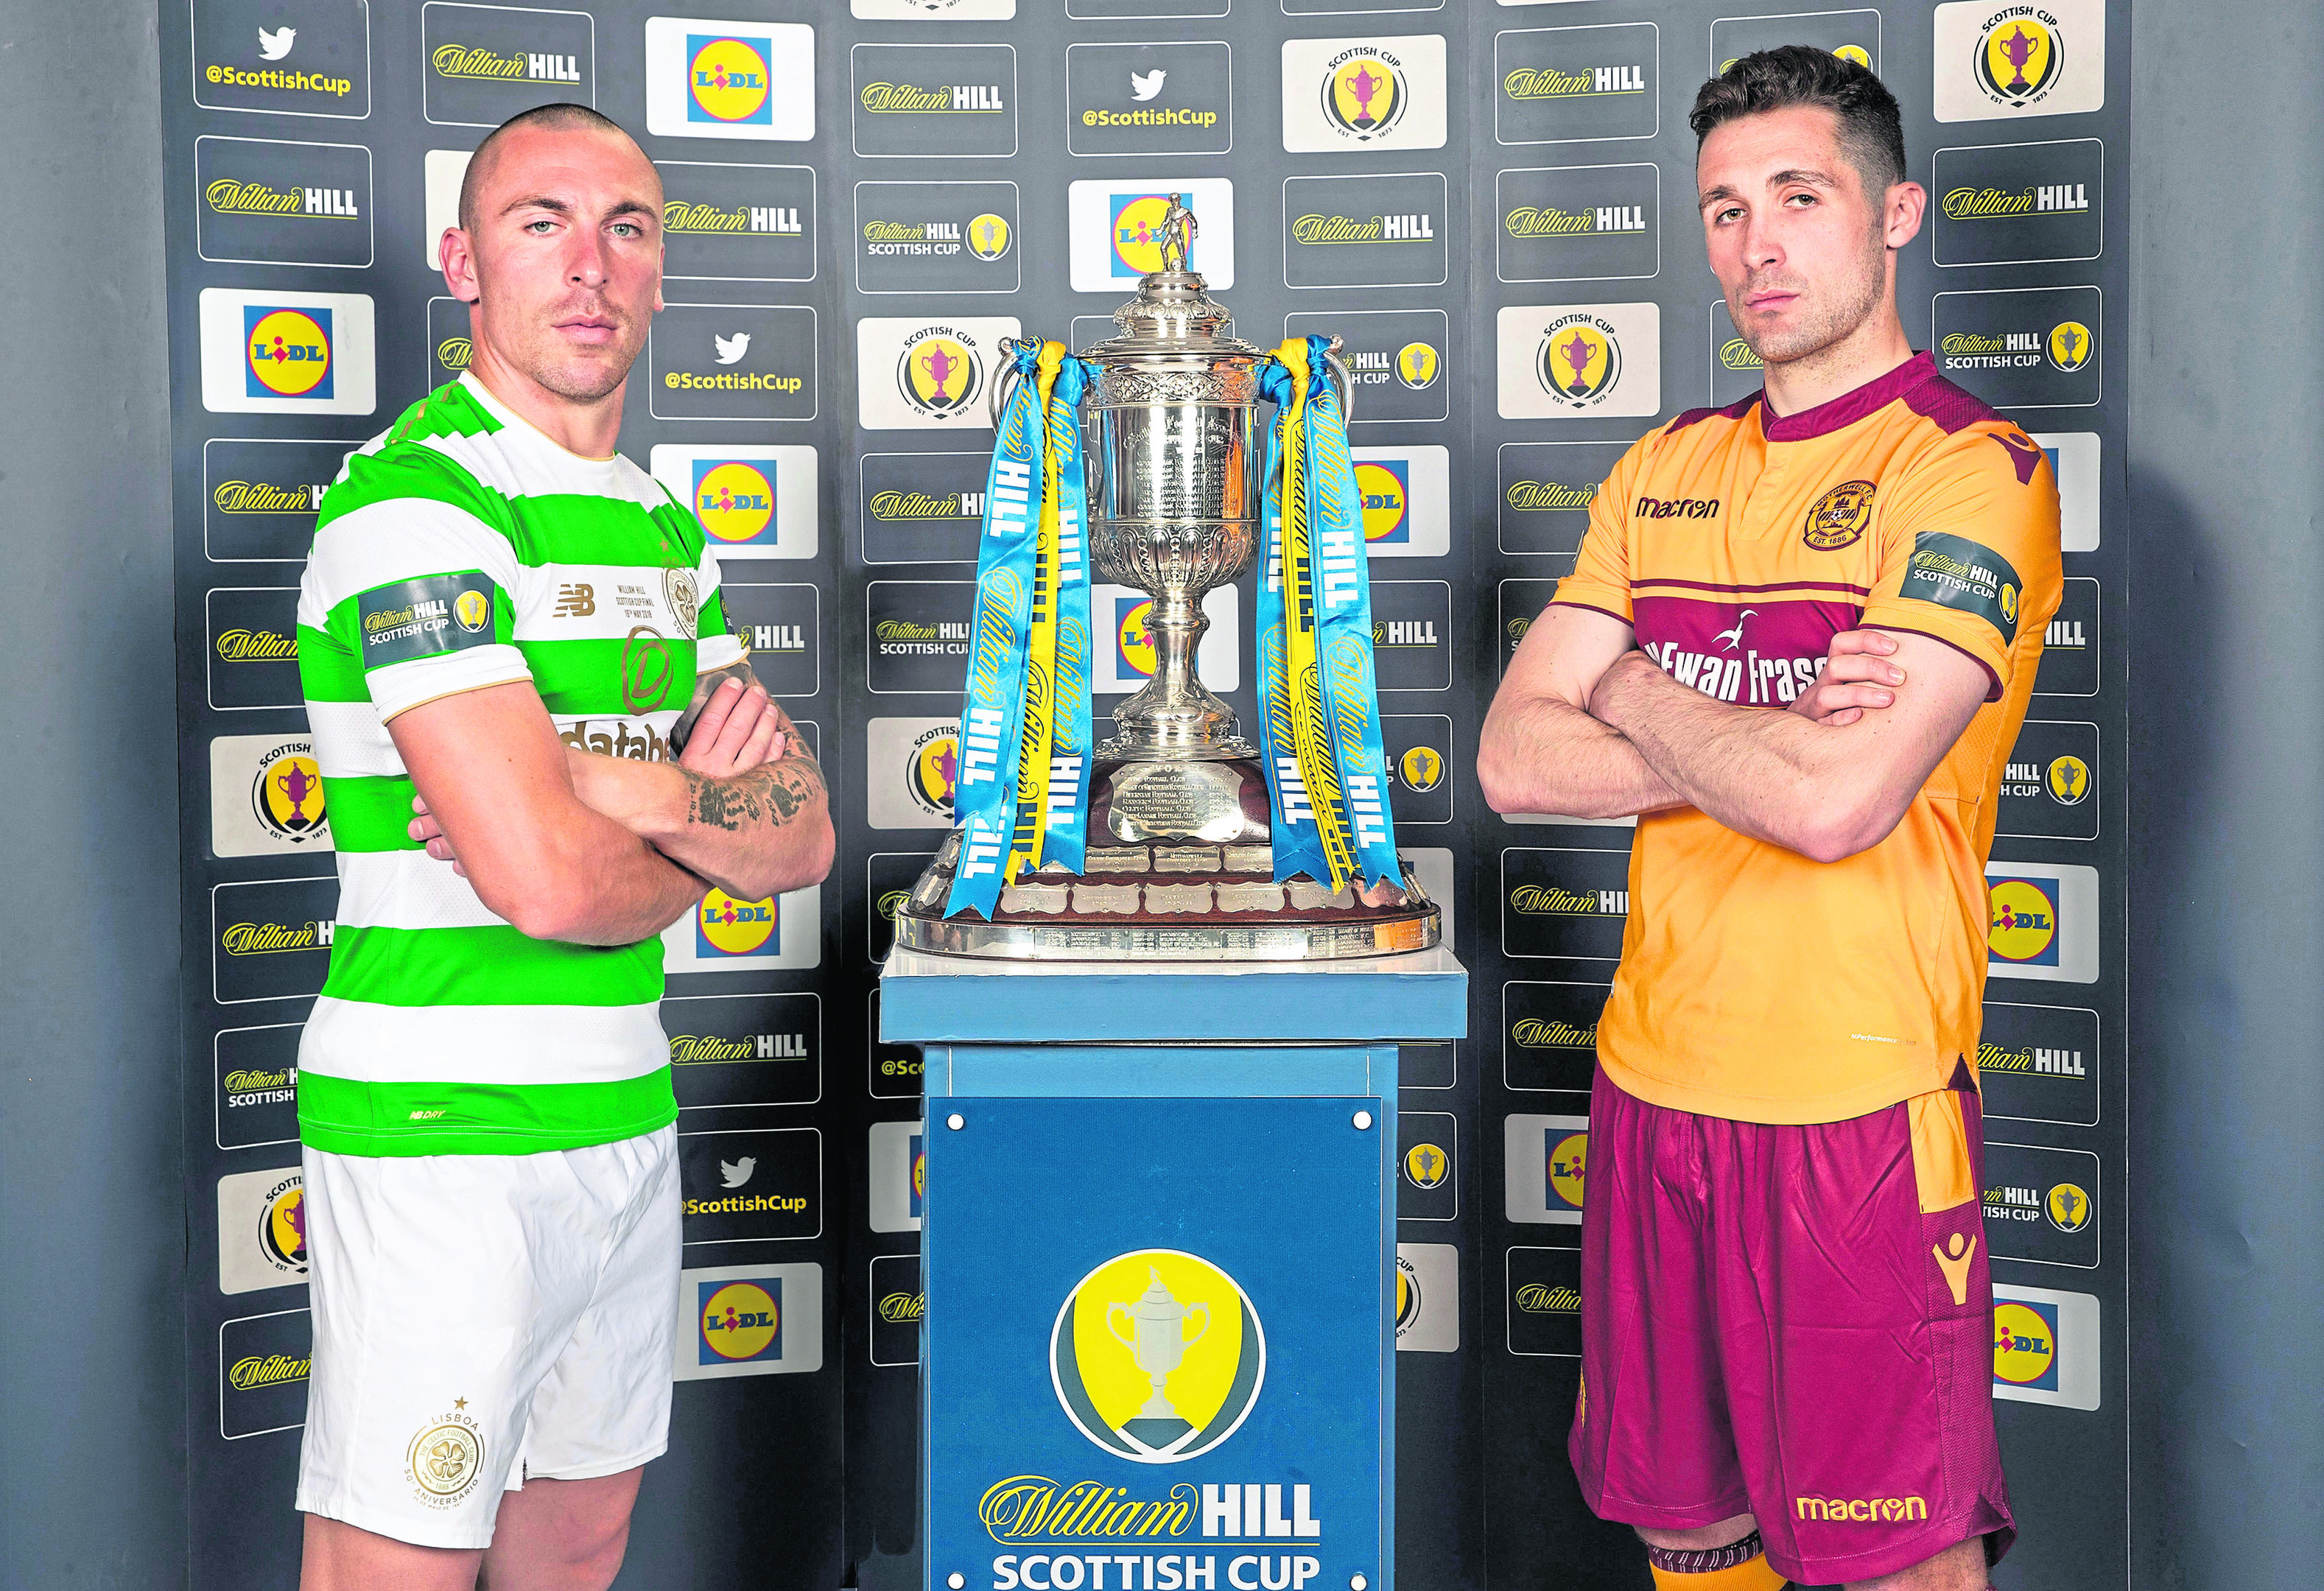 Celtic's Scott Brown and Motherwell's Carl McHugh during the preview day ahead of the Scottish Cup Final at Hampden Park.